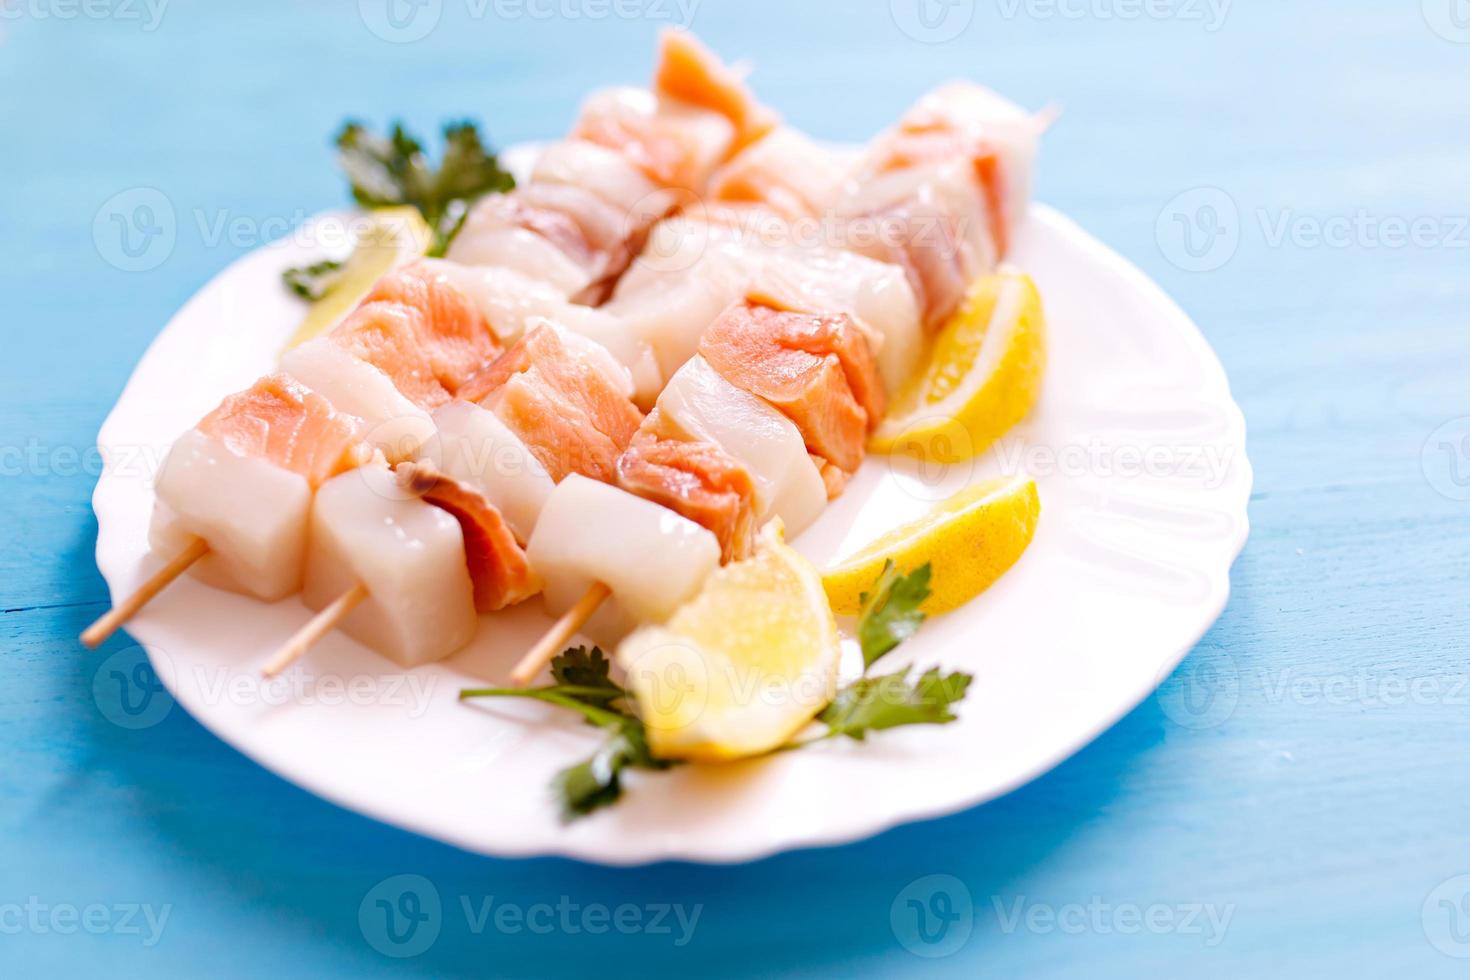 Tasty skewers of fresh fish with vegetables. photo